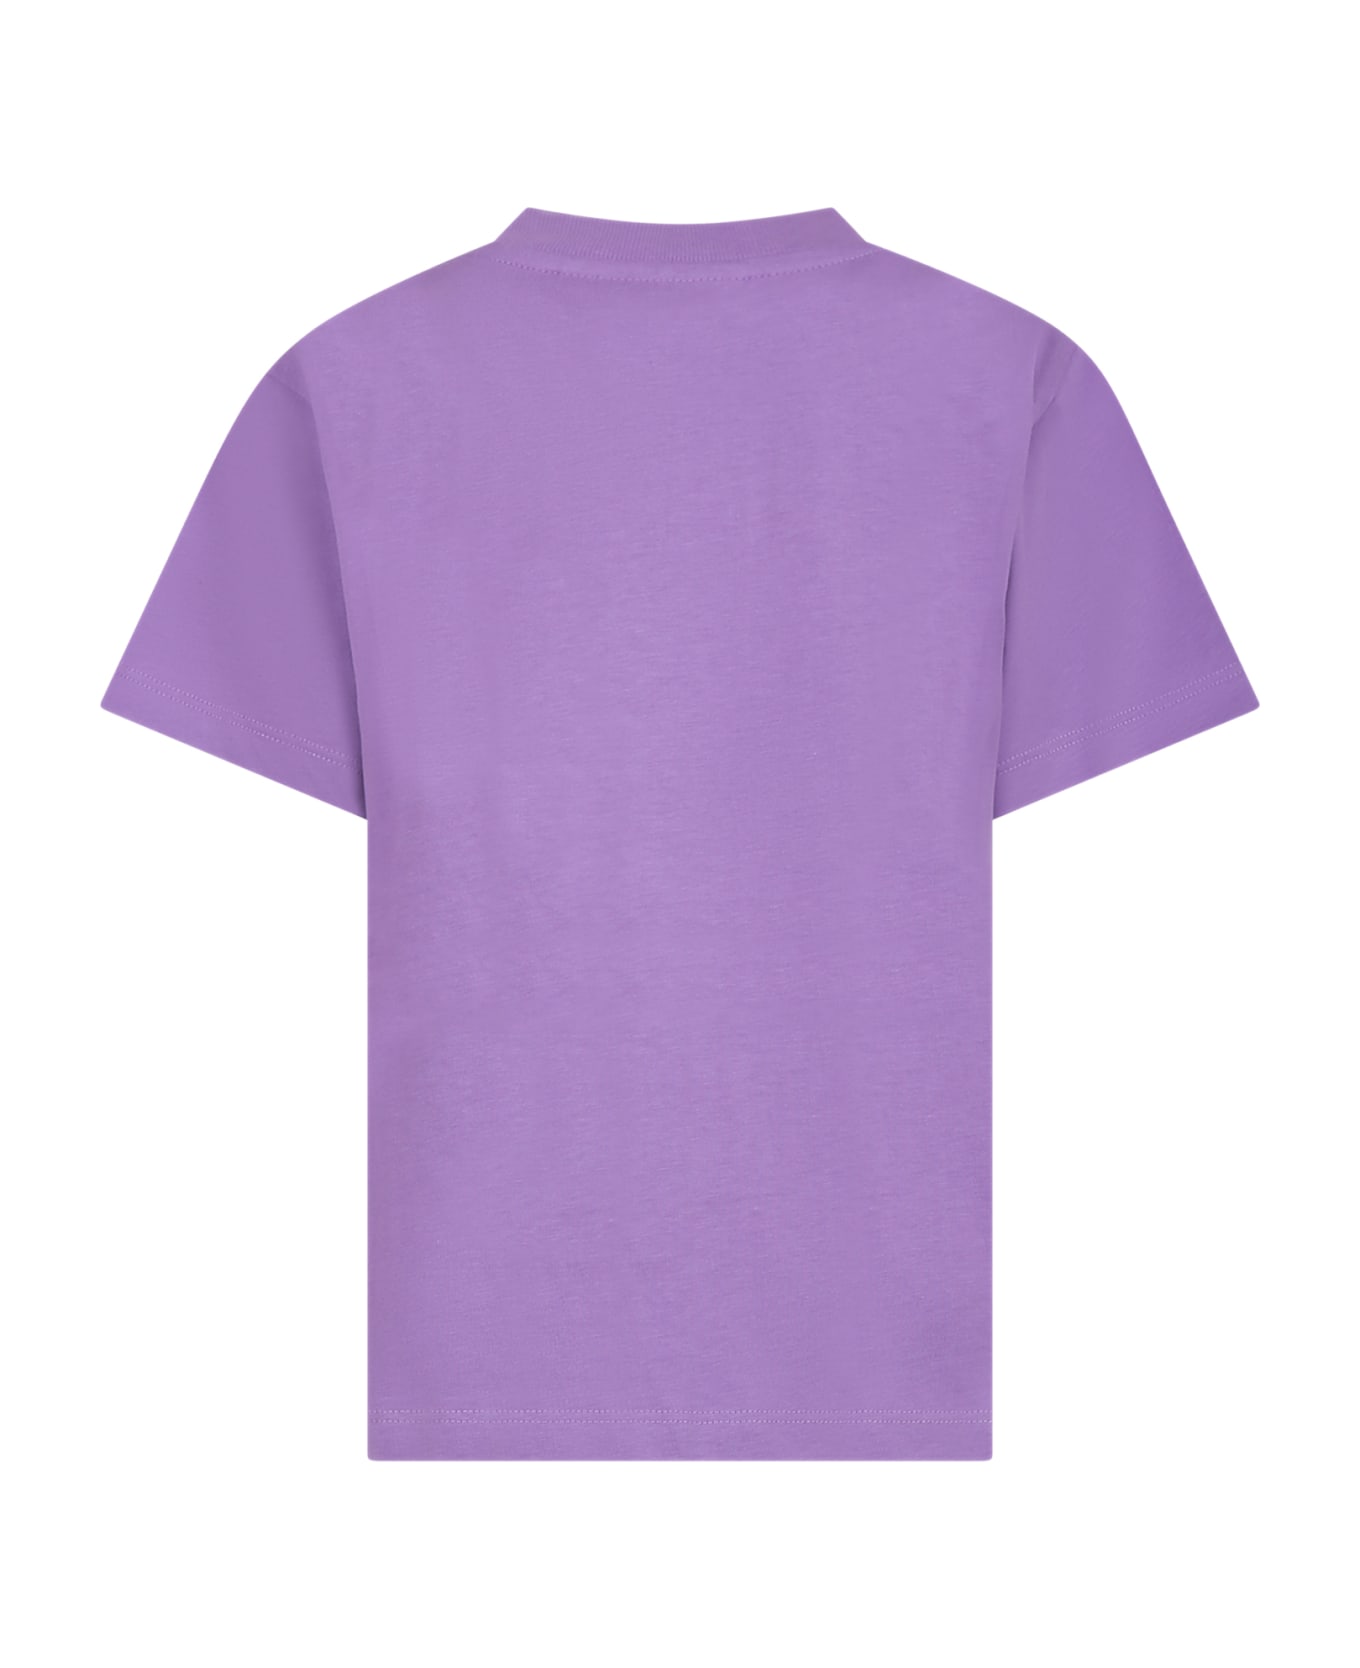 Molo Purple T-shirt For Boy With Writing - Violet